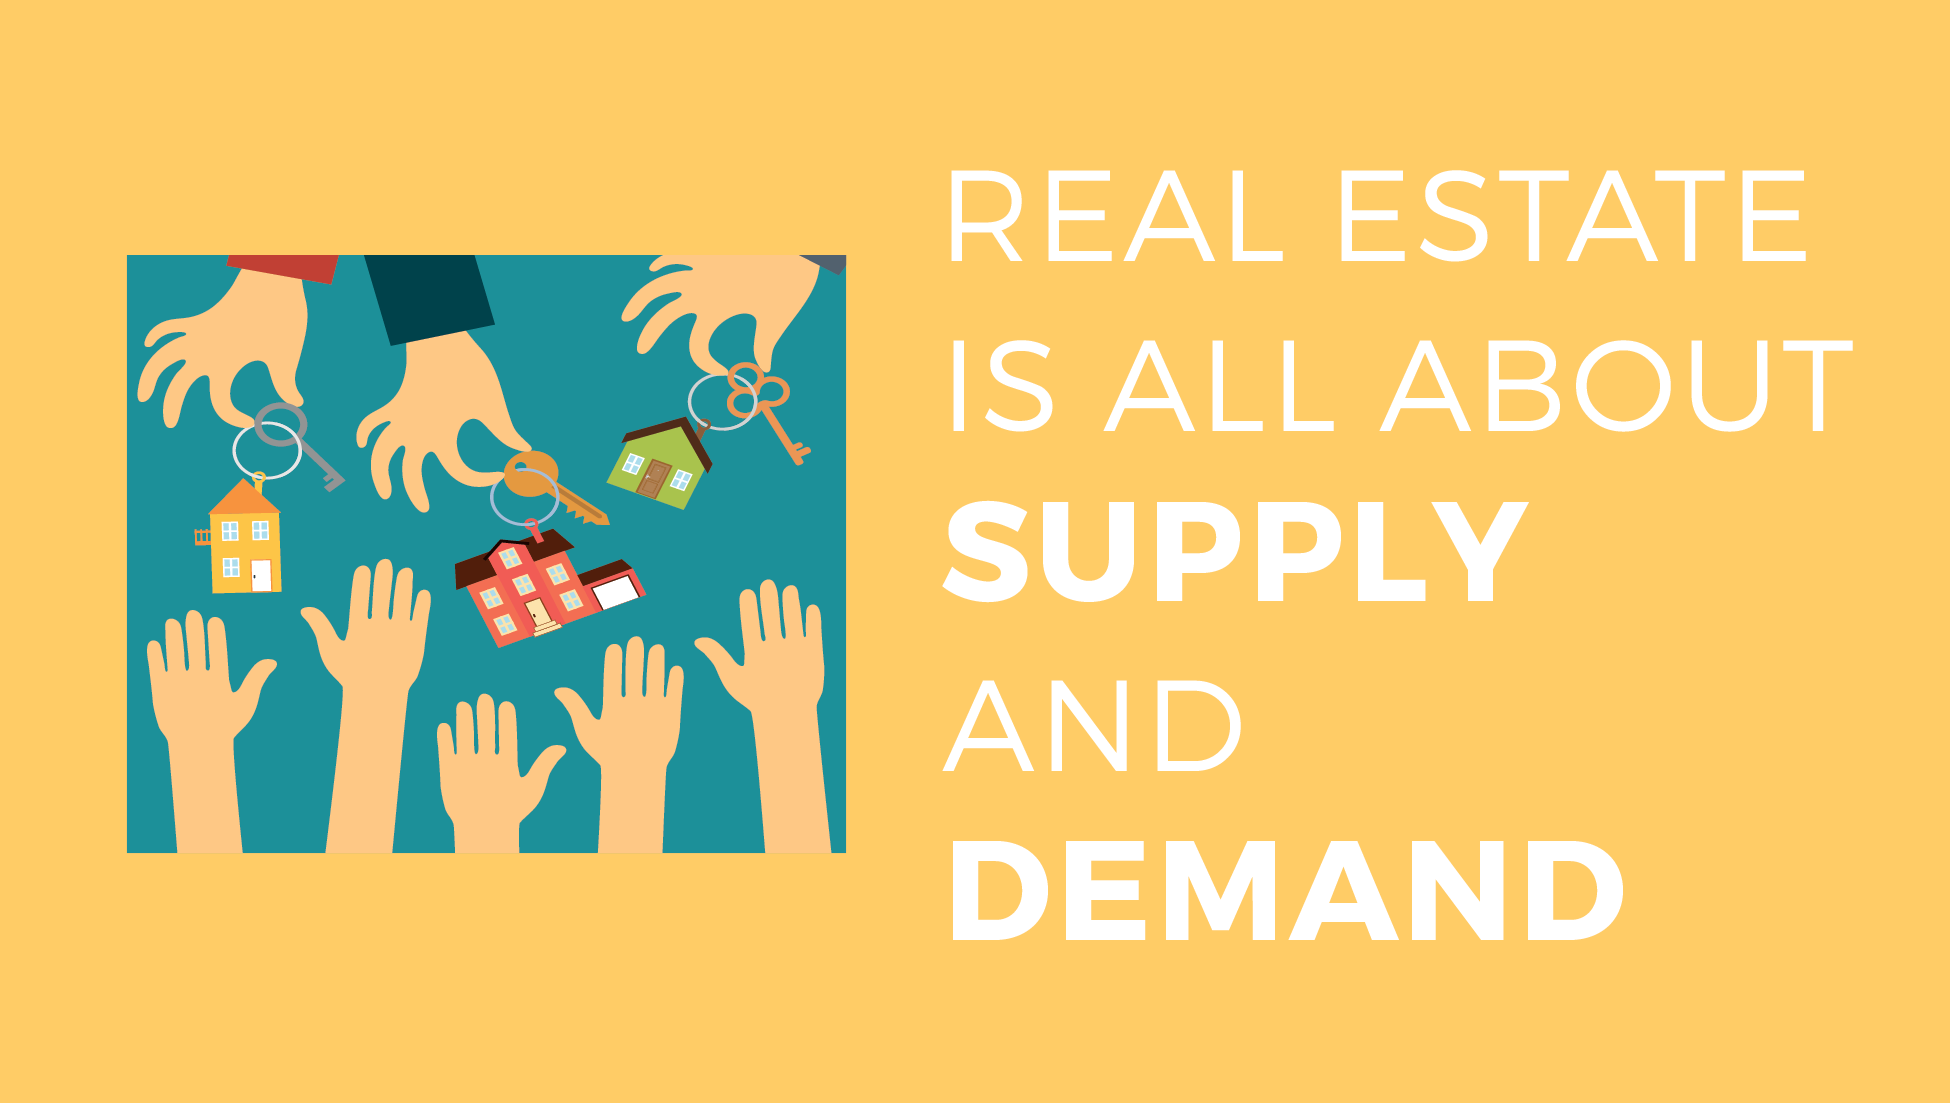 Real estate is all about supply and demand